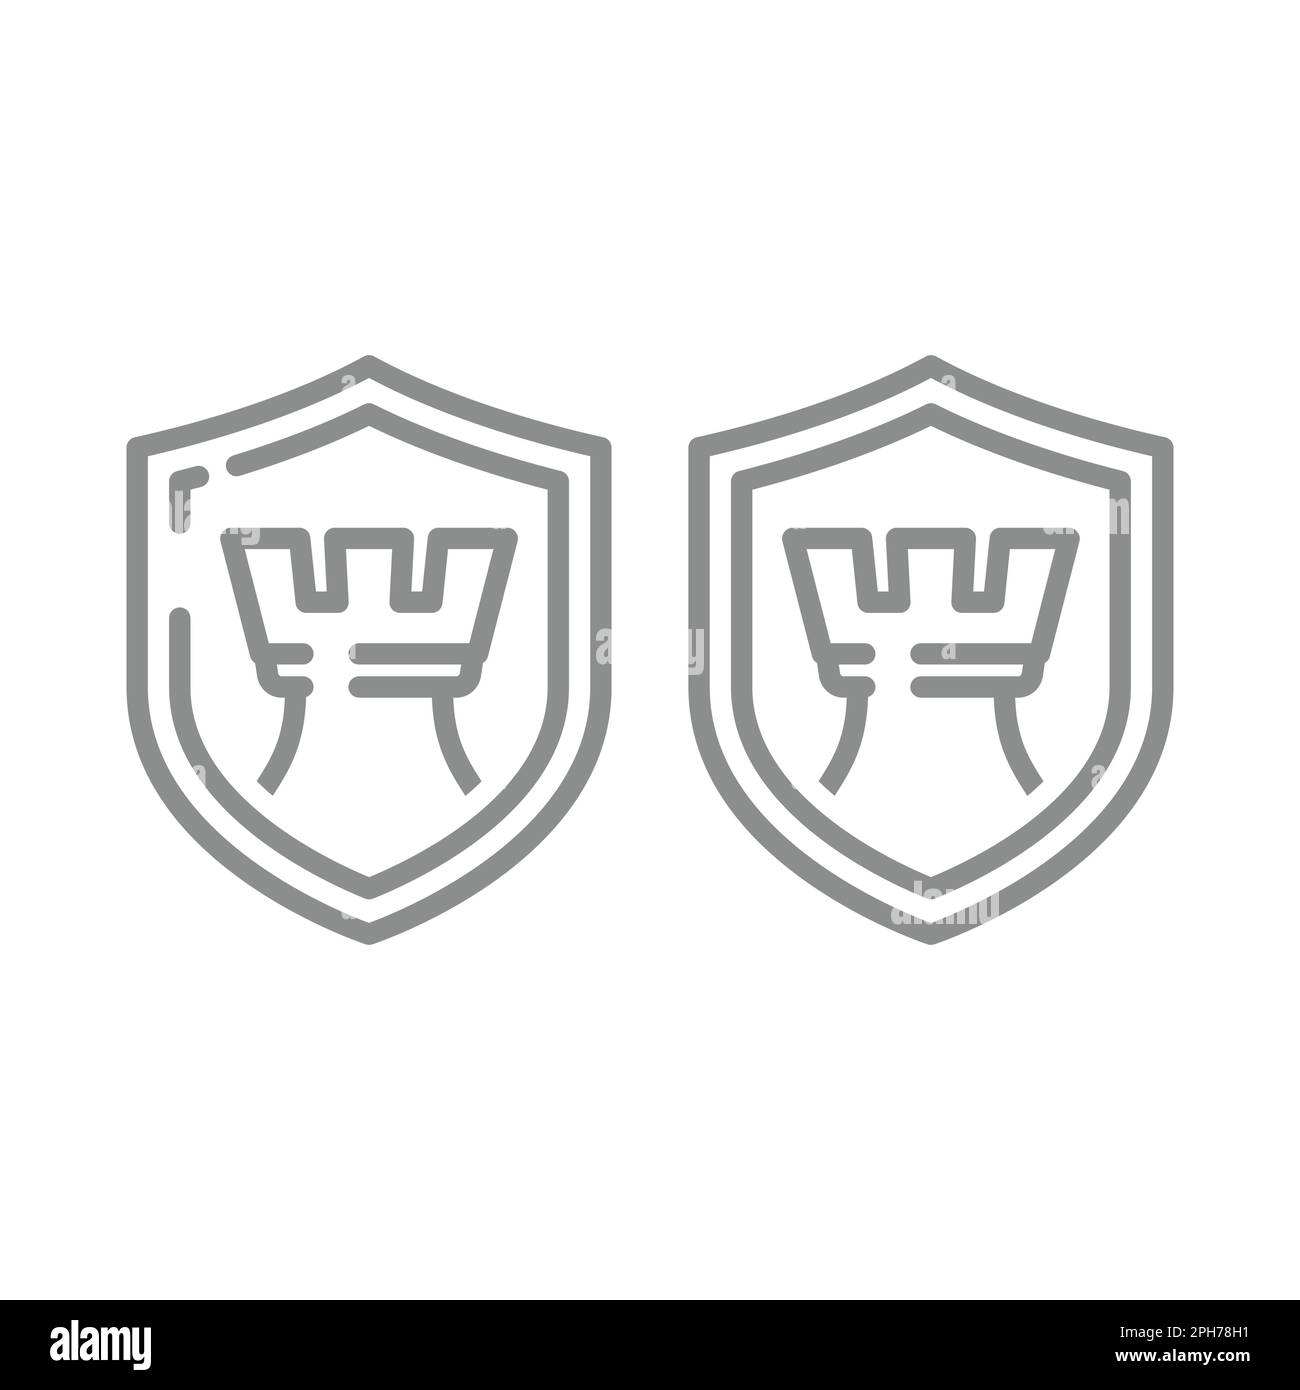 Chess king piece and shield icon. Guarded, protected, secure concept line vector icons. Stock Vector